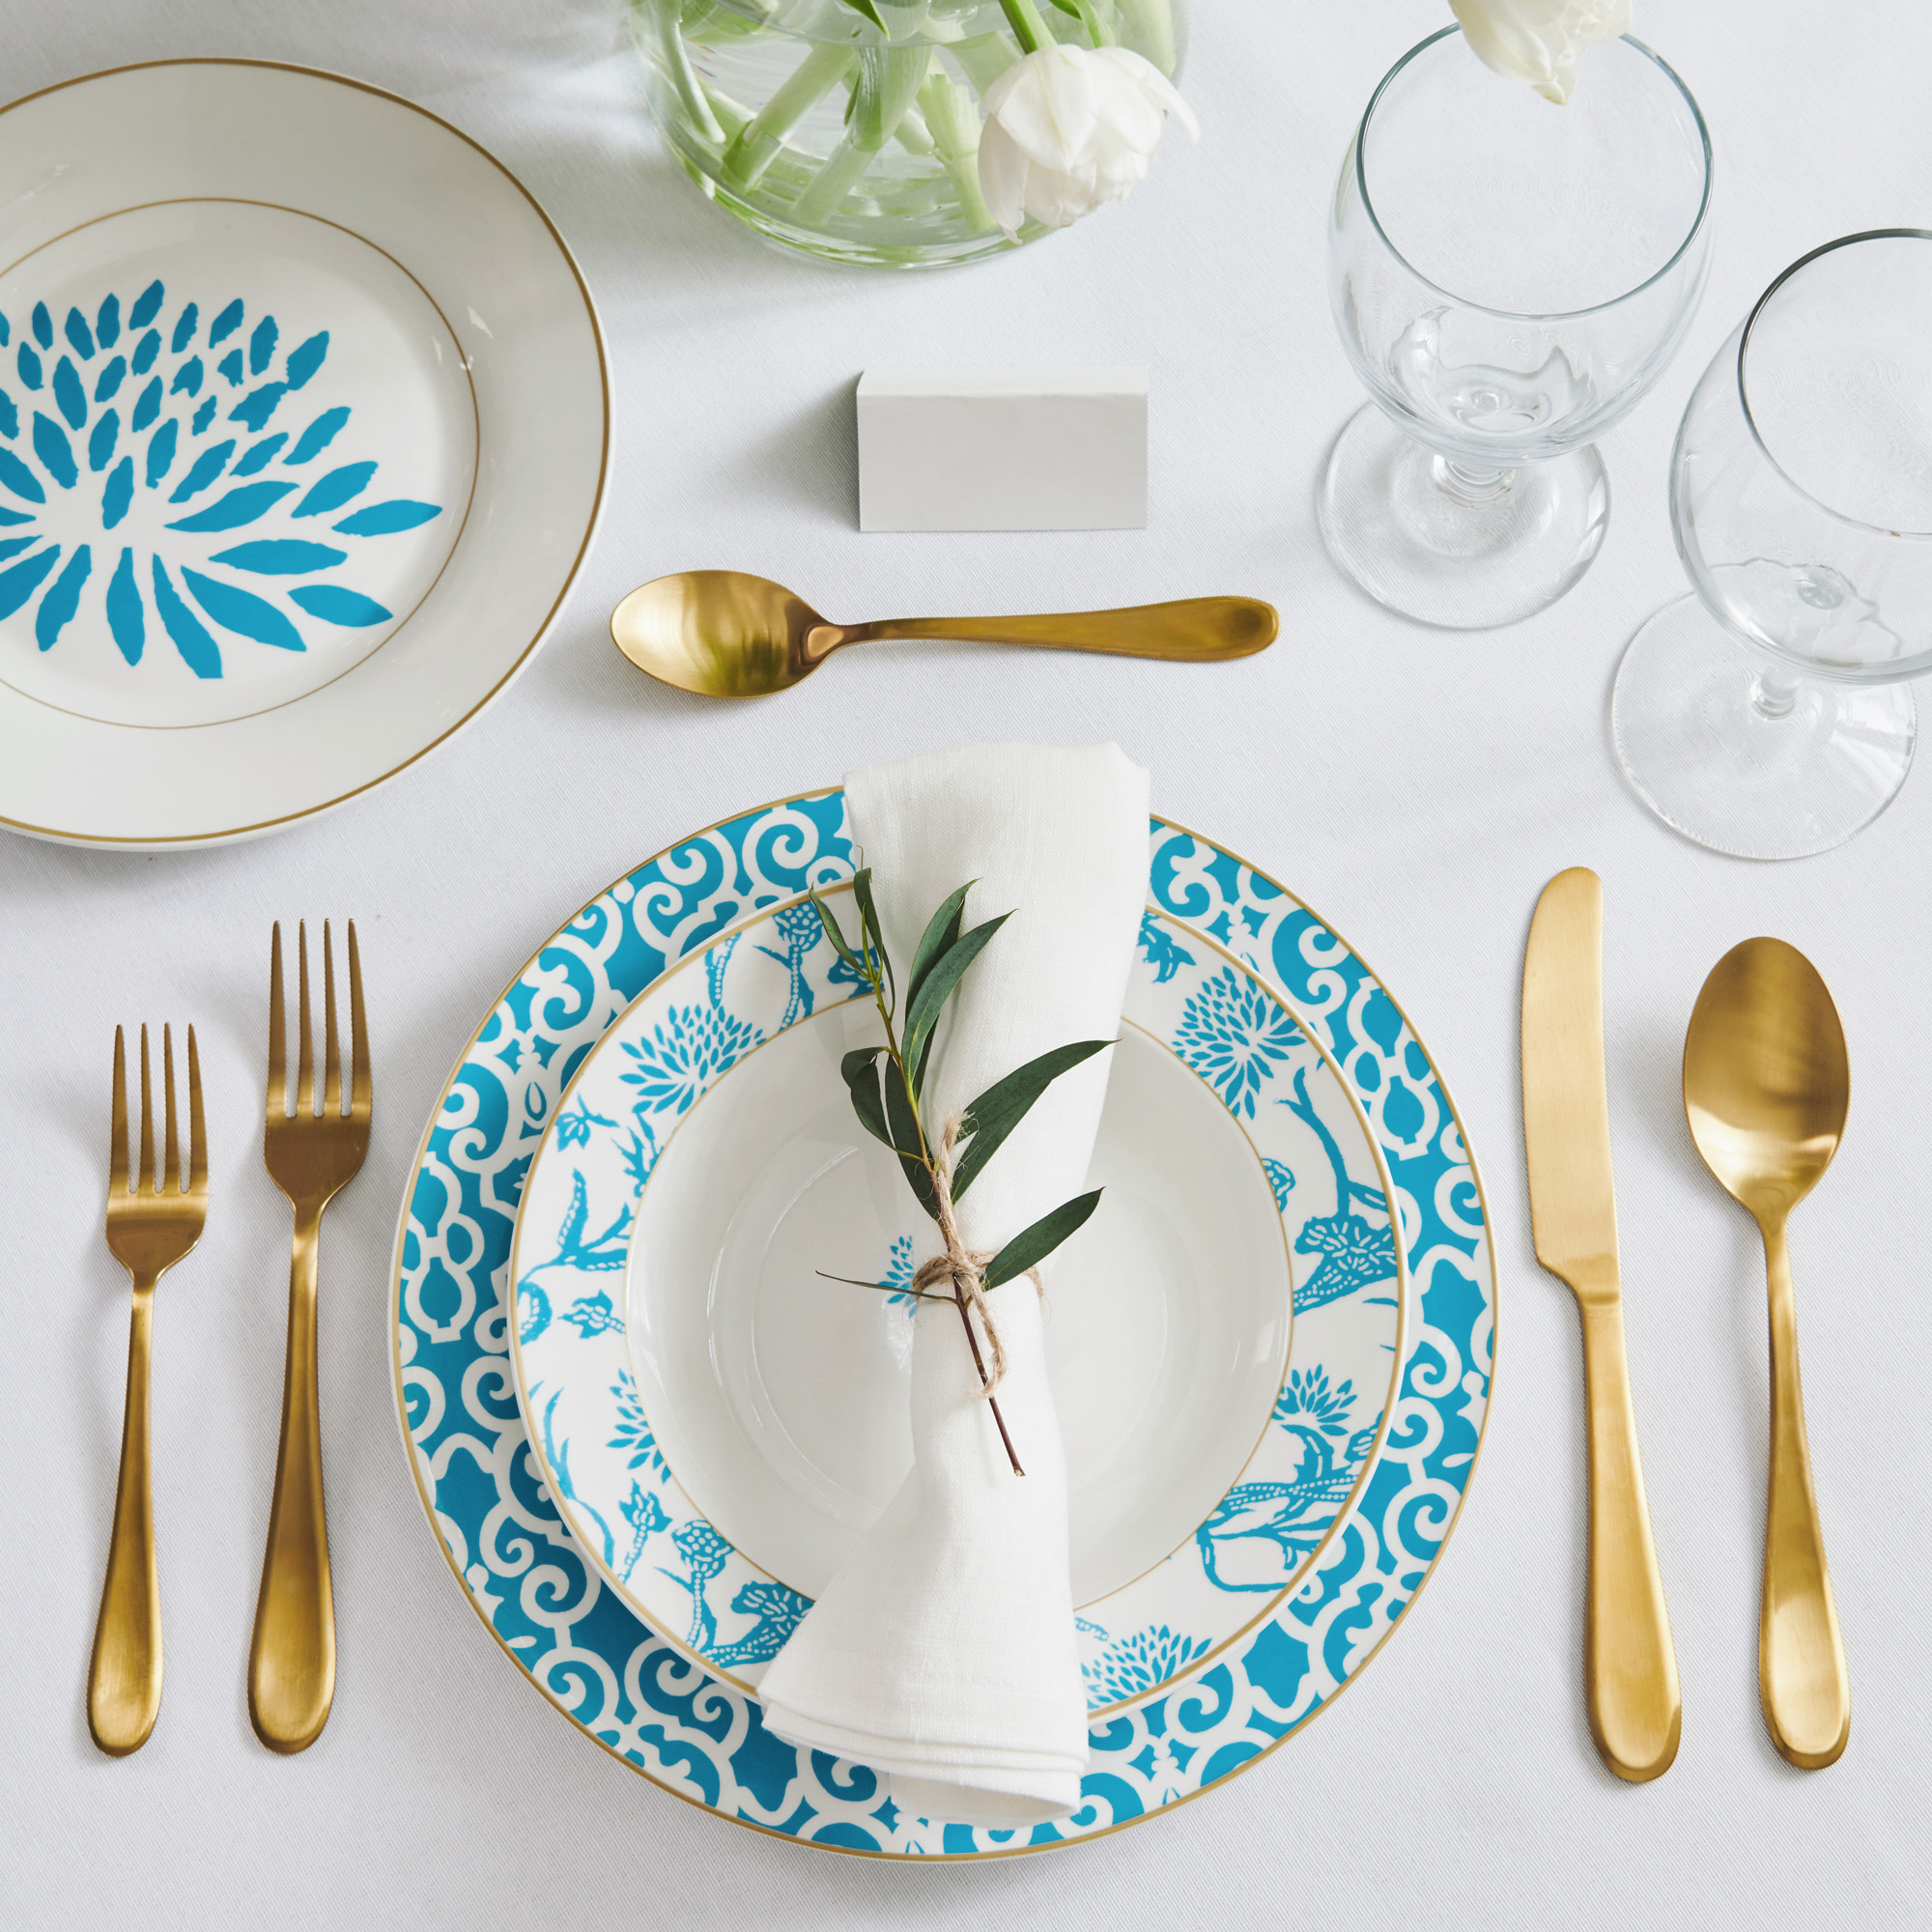 Patricia Heaton Home Southampton Collection 12 Piece Porcelain Dinnerware Set - Turquoise & White with Gold Trim - image 1 of 1